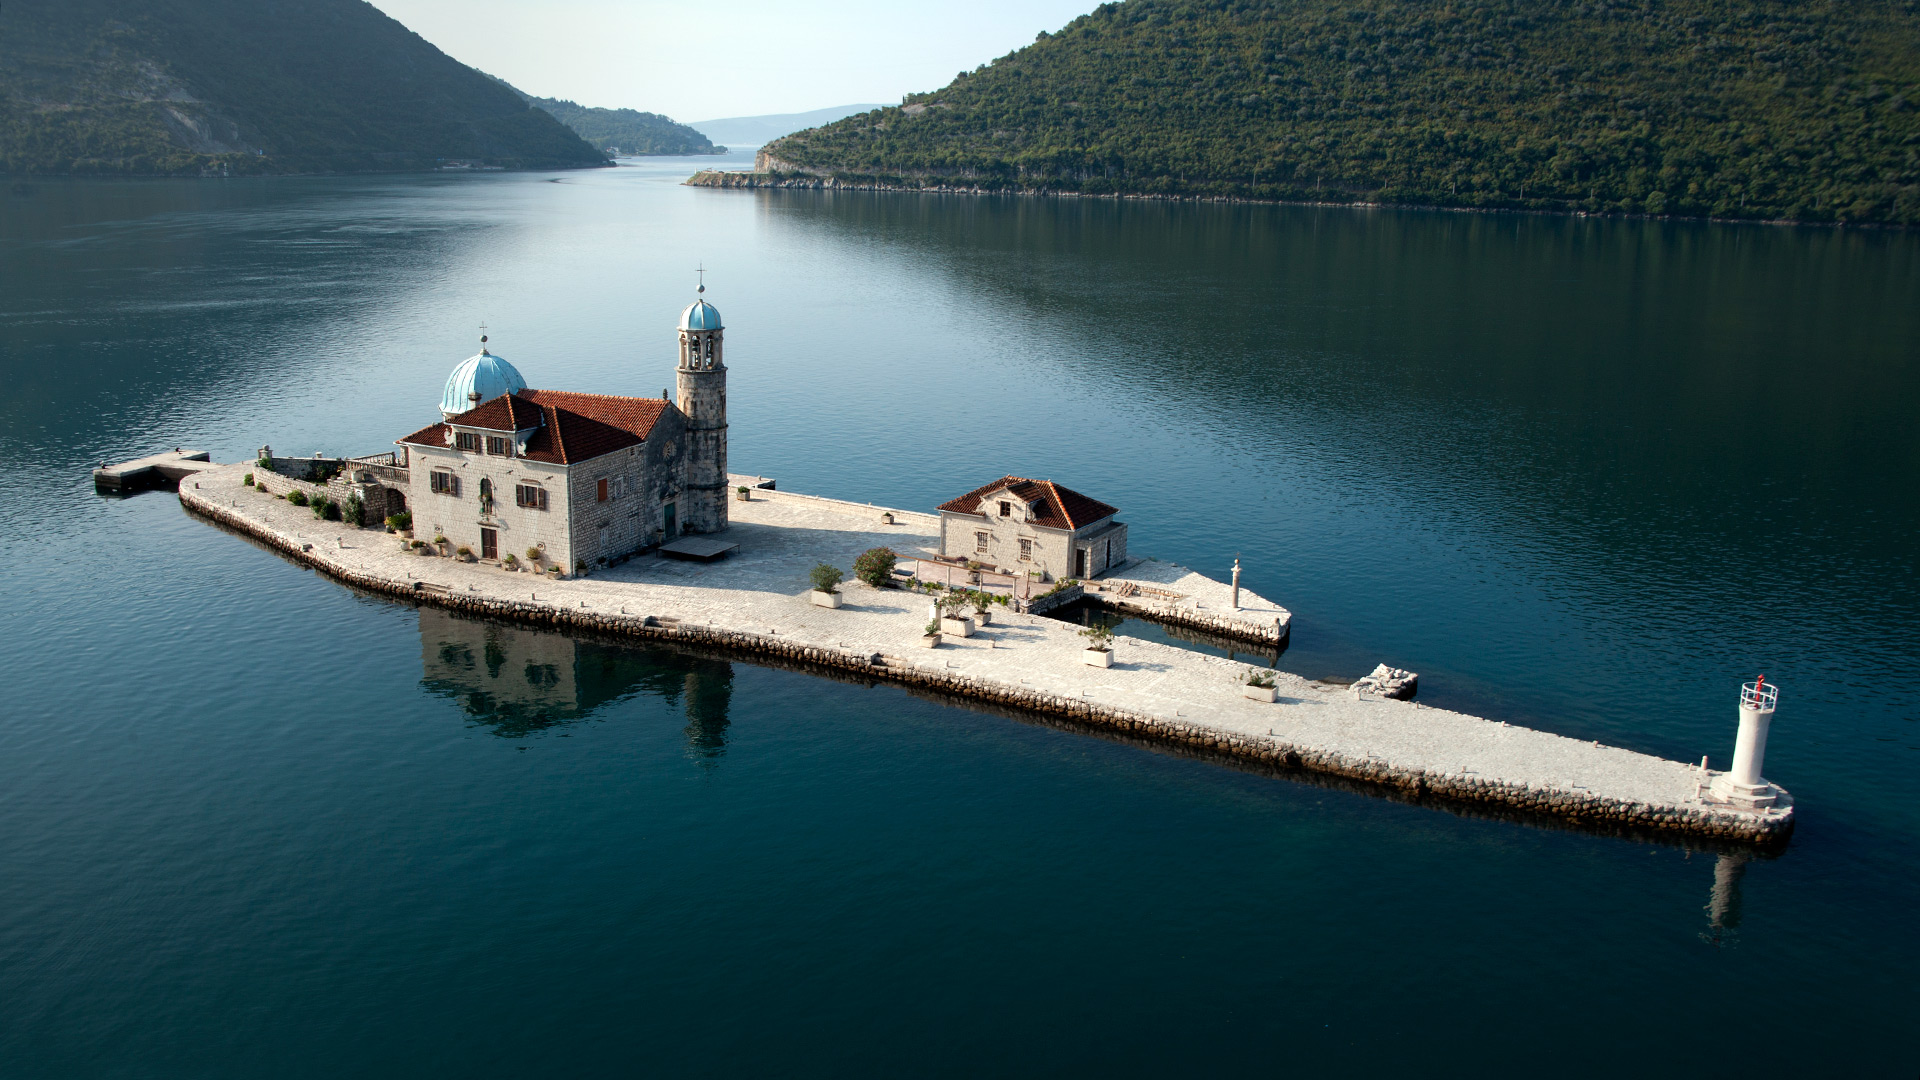 Gospa od Skrpjela is an artificial island of our lady on the Reef, opposite Perast, Montenegro